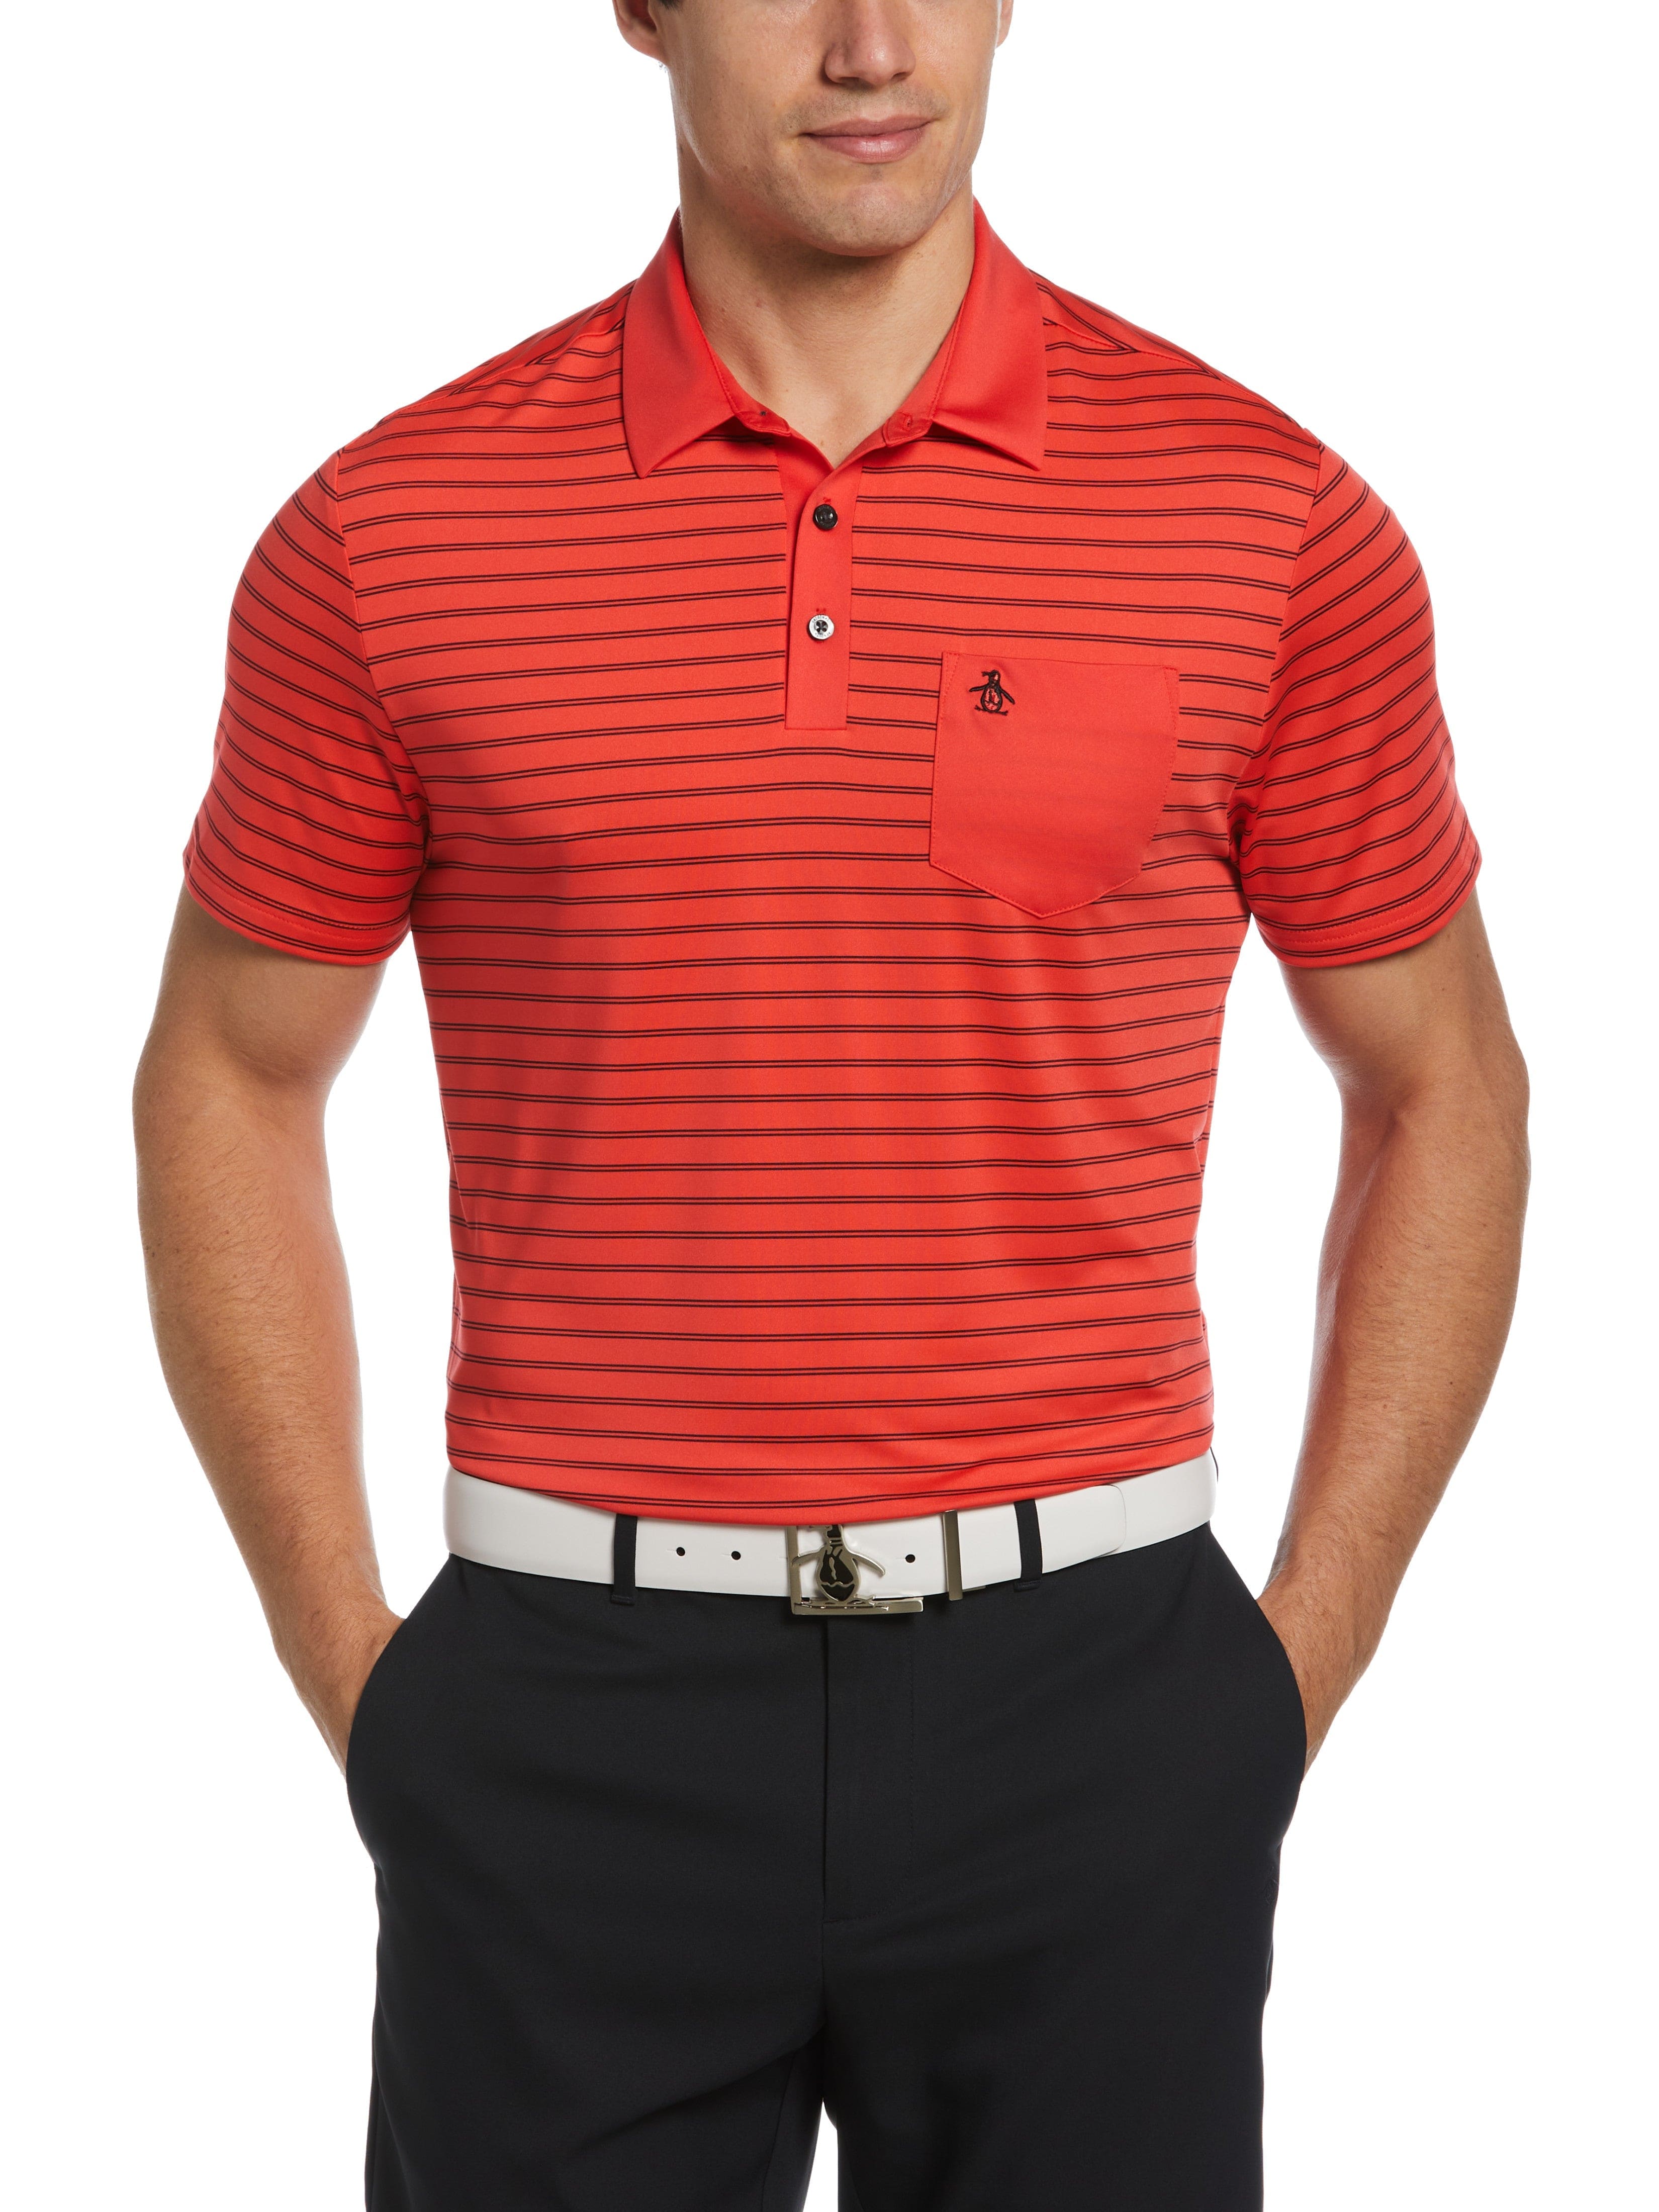 Original Penguin Mens Two-Color Stripe Golf Polo Shirt, Size Small, Bittersweet Red, Polyester/Spandex | Golf Apparel Shop